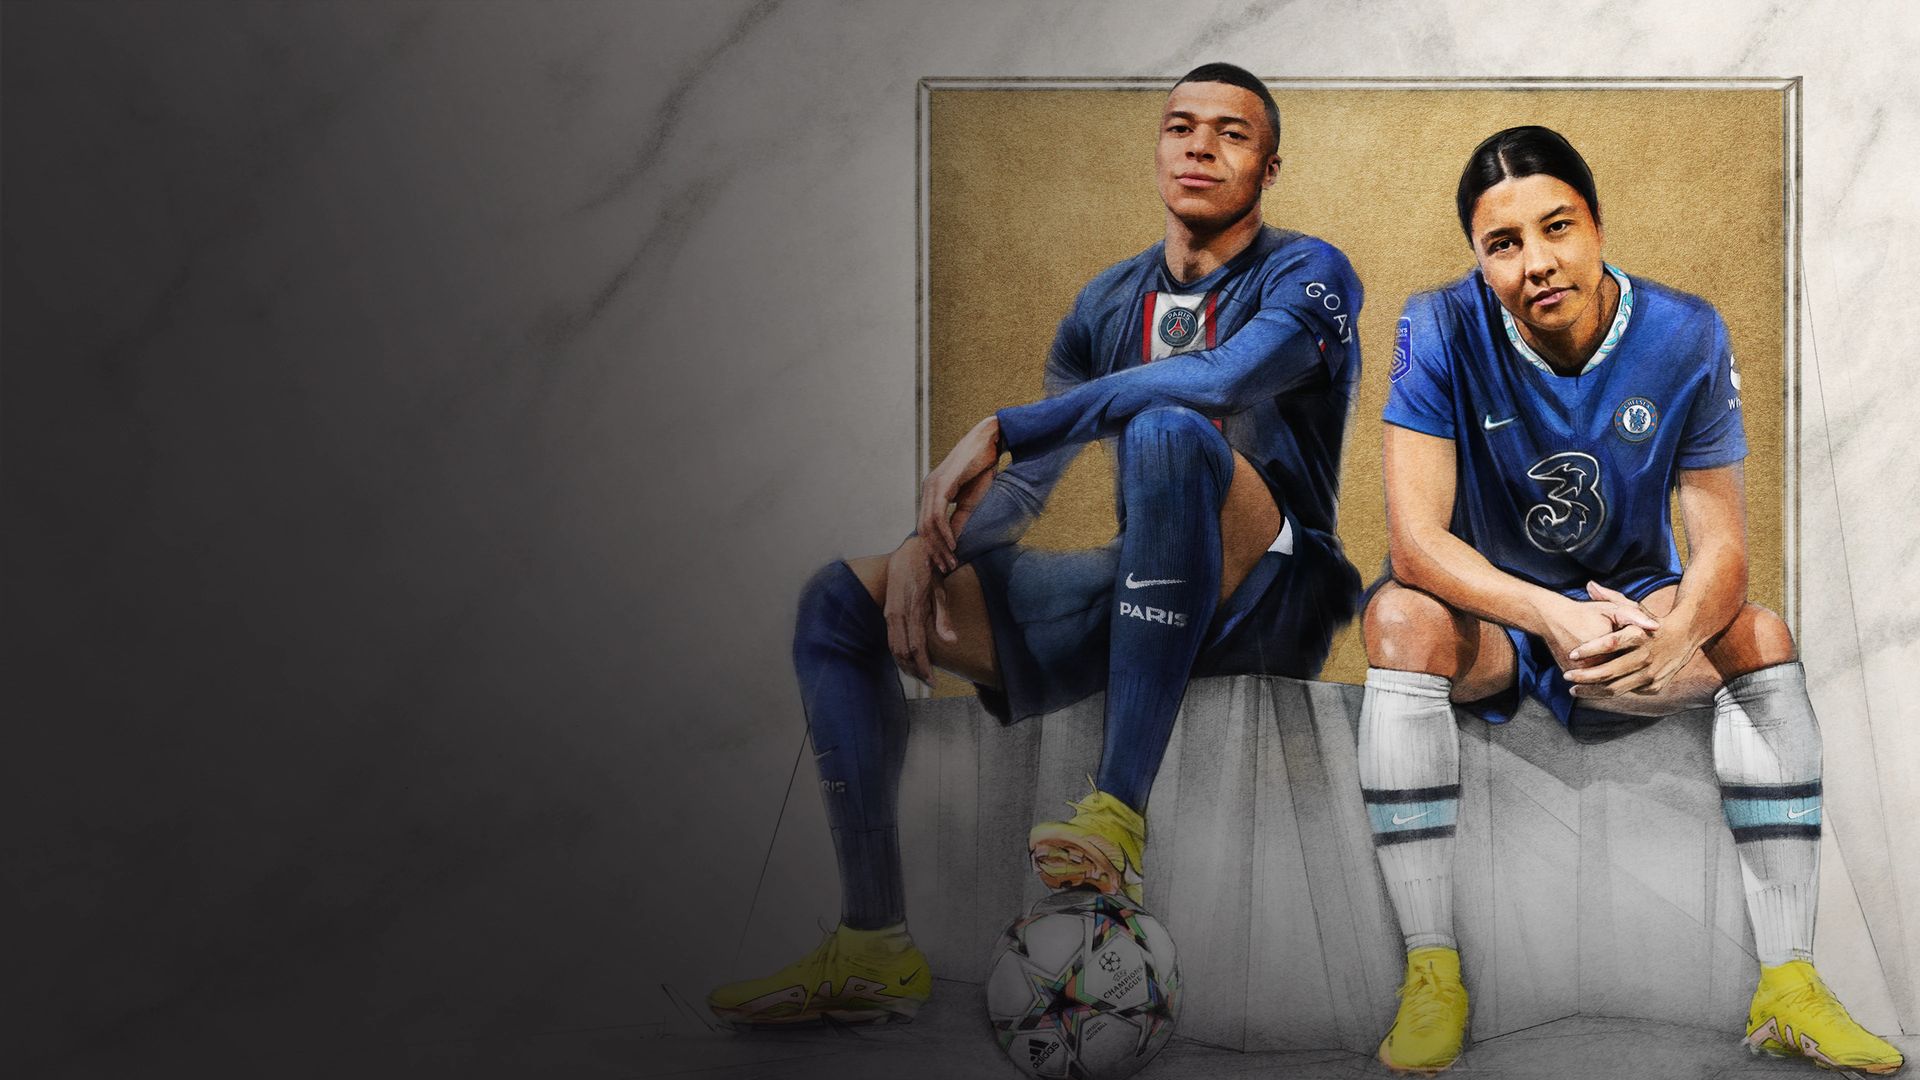 The FIFA 23 trailer was released a few hours ago. We will see Sam Kerr and Kylian Mbappé on the FIFA 23 cover.